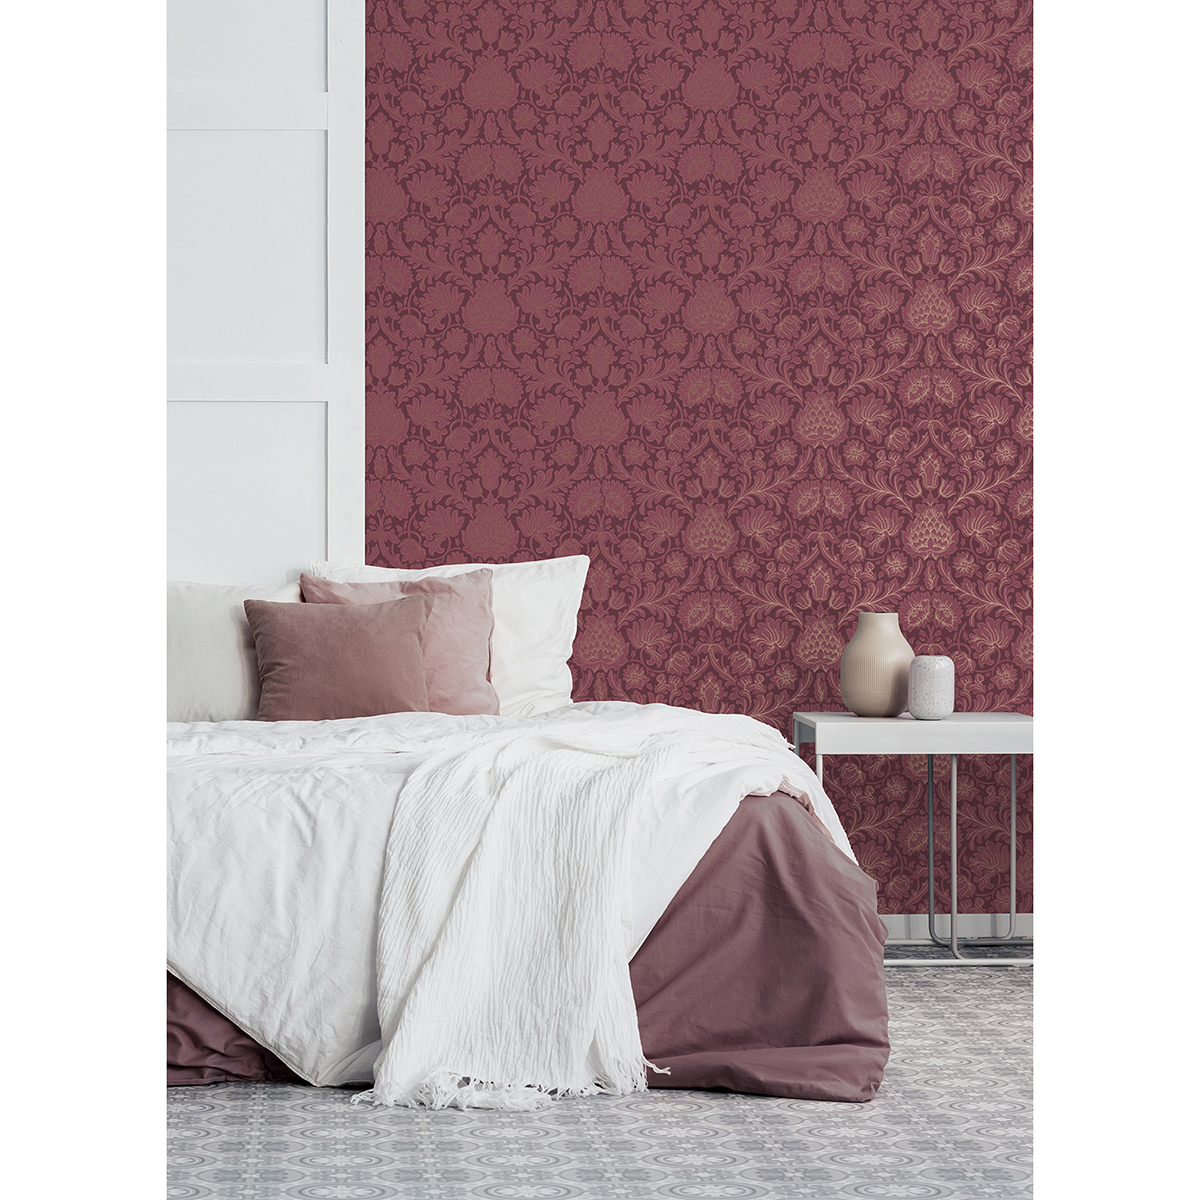 M1680 - Bamburg Red Floral Wallpaper - by Brewster